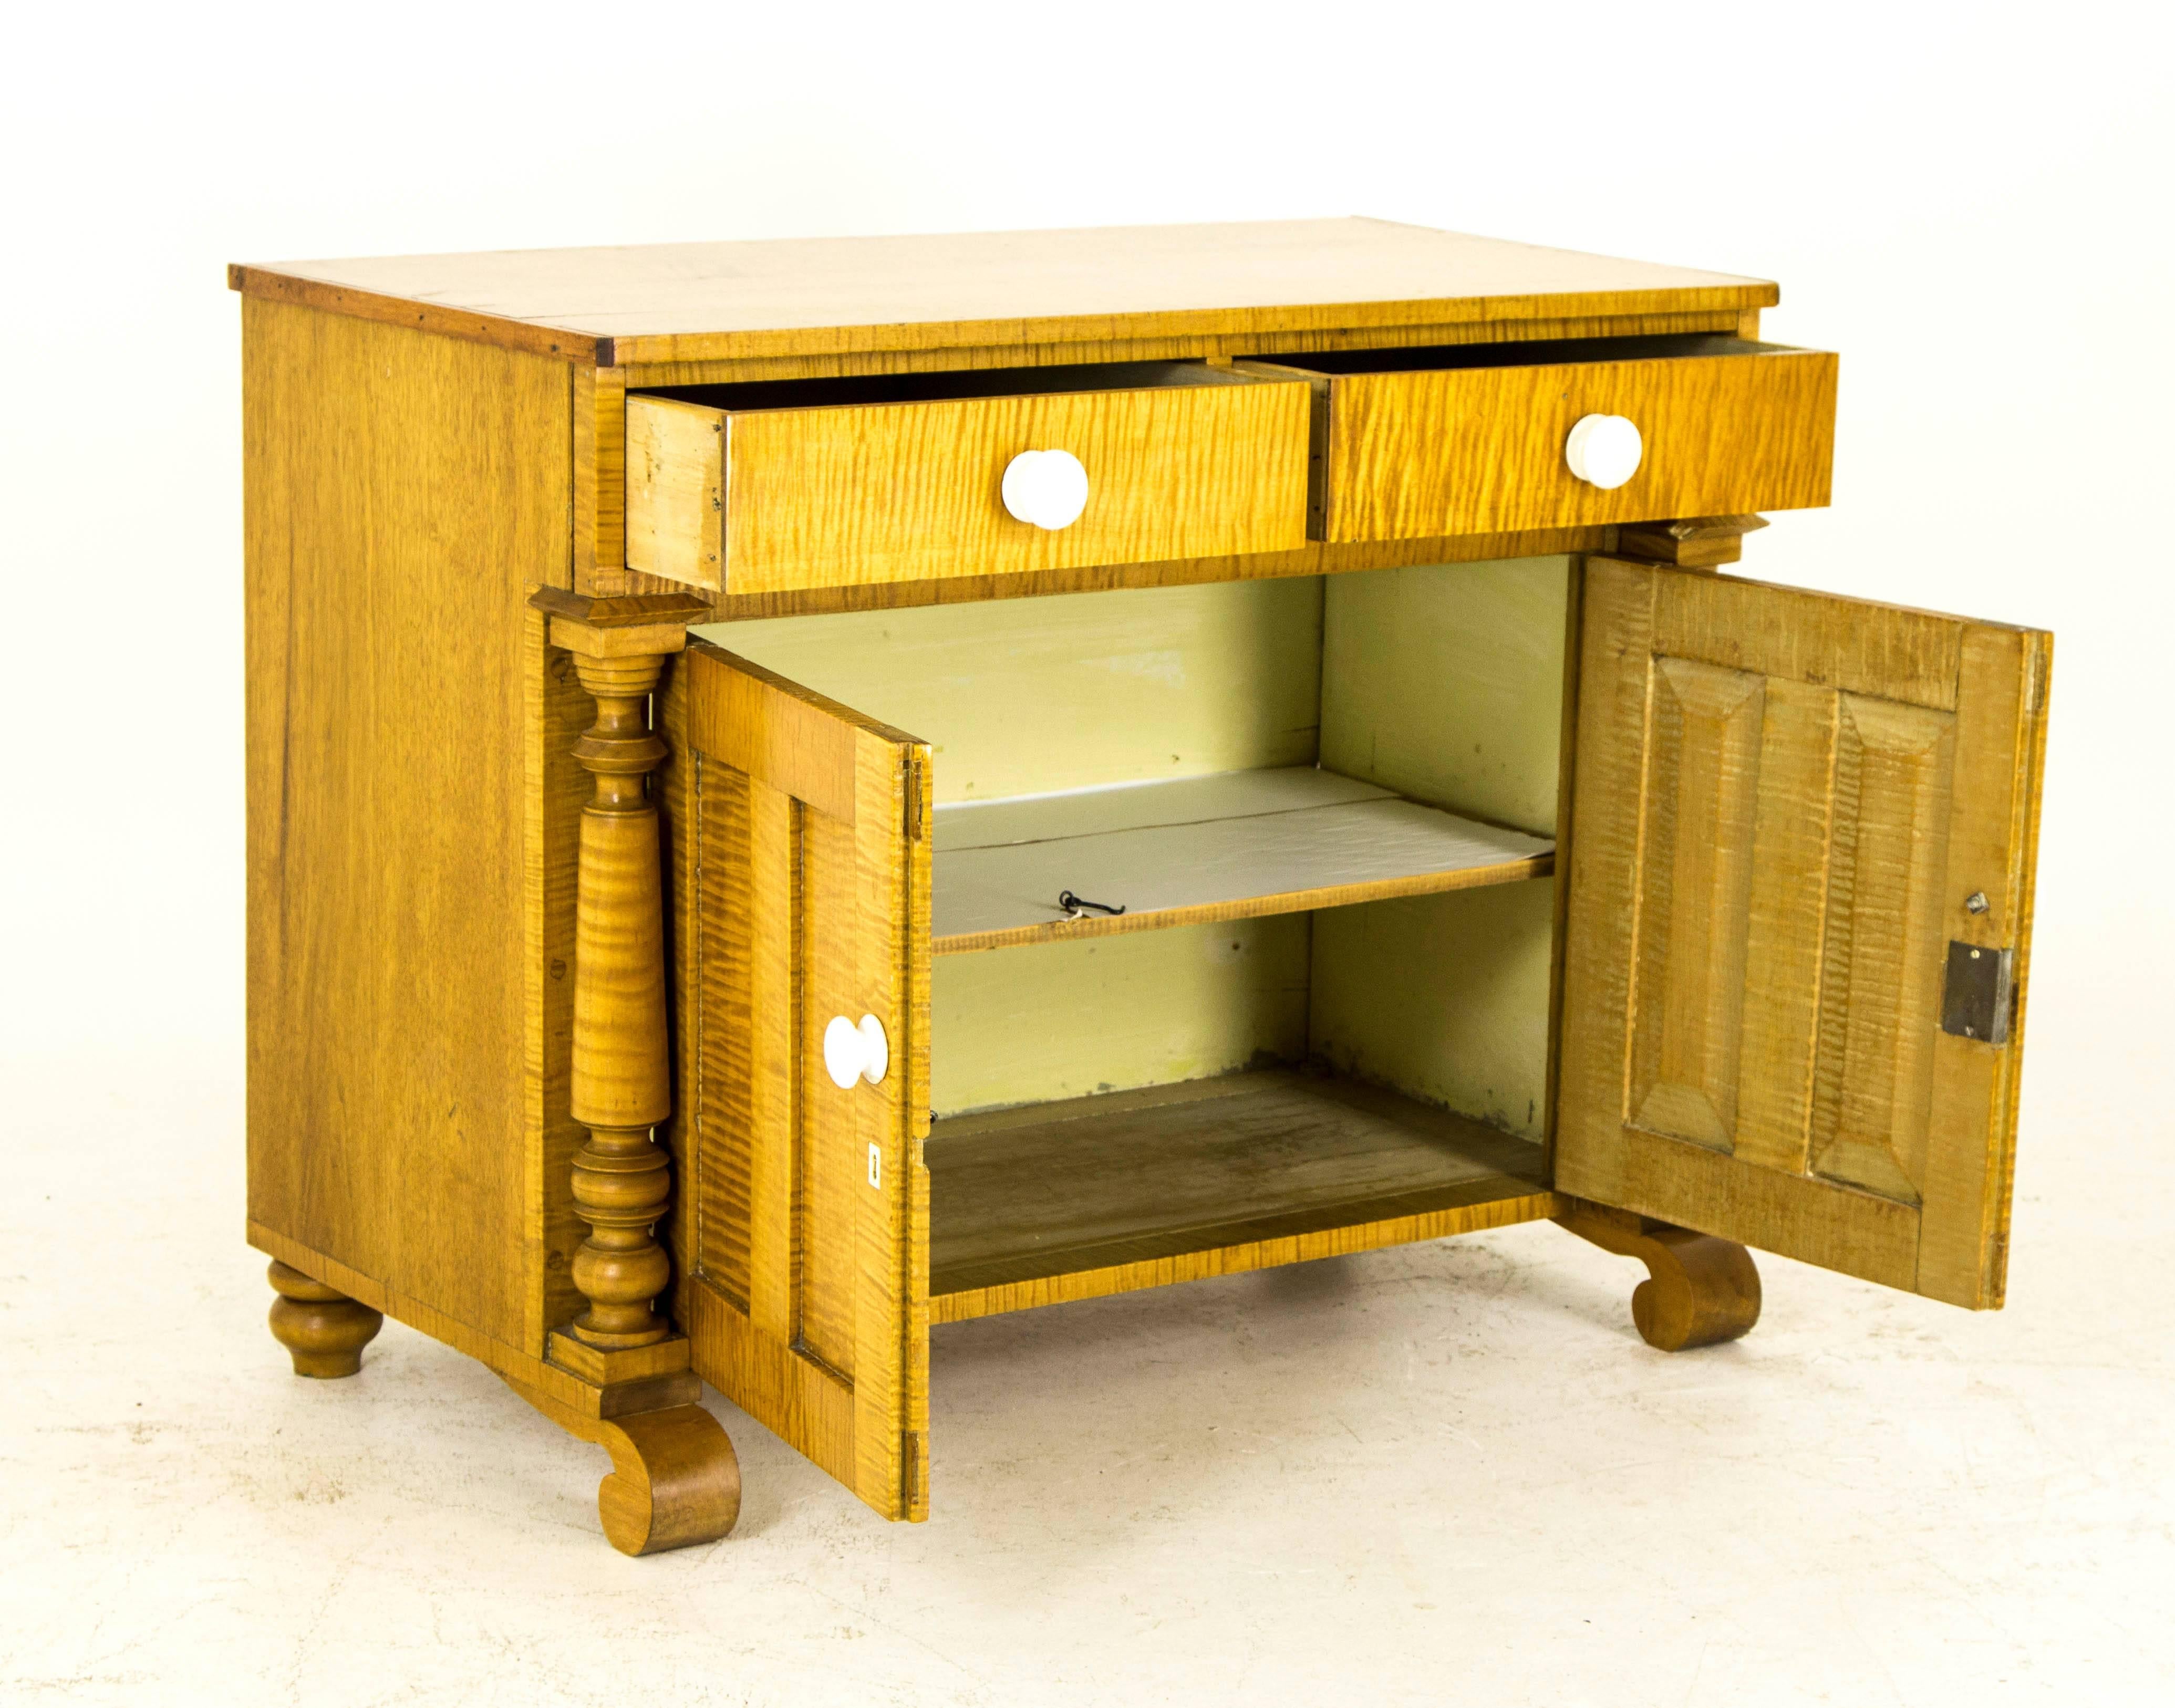 This antique French Canadian washstand is constructed of lovely tiger stripe maple and can be used as s dry sink or commode. The height is ideal for a baby changing table and would make an excellent gift for an expectant or new mother also.